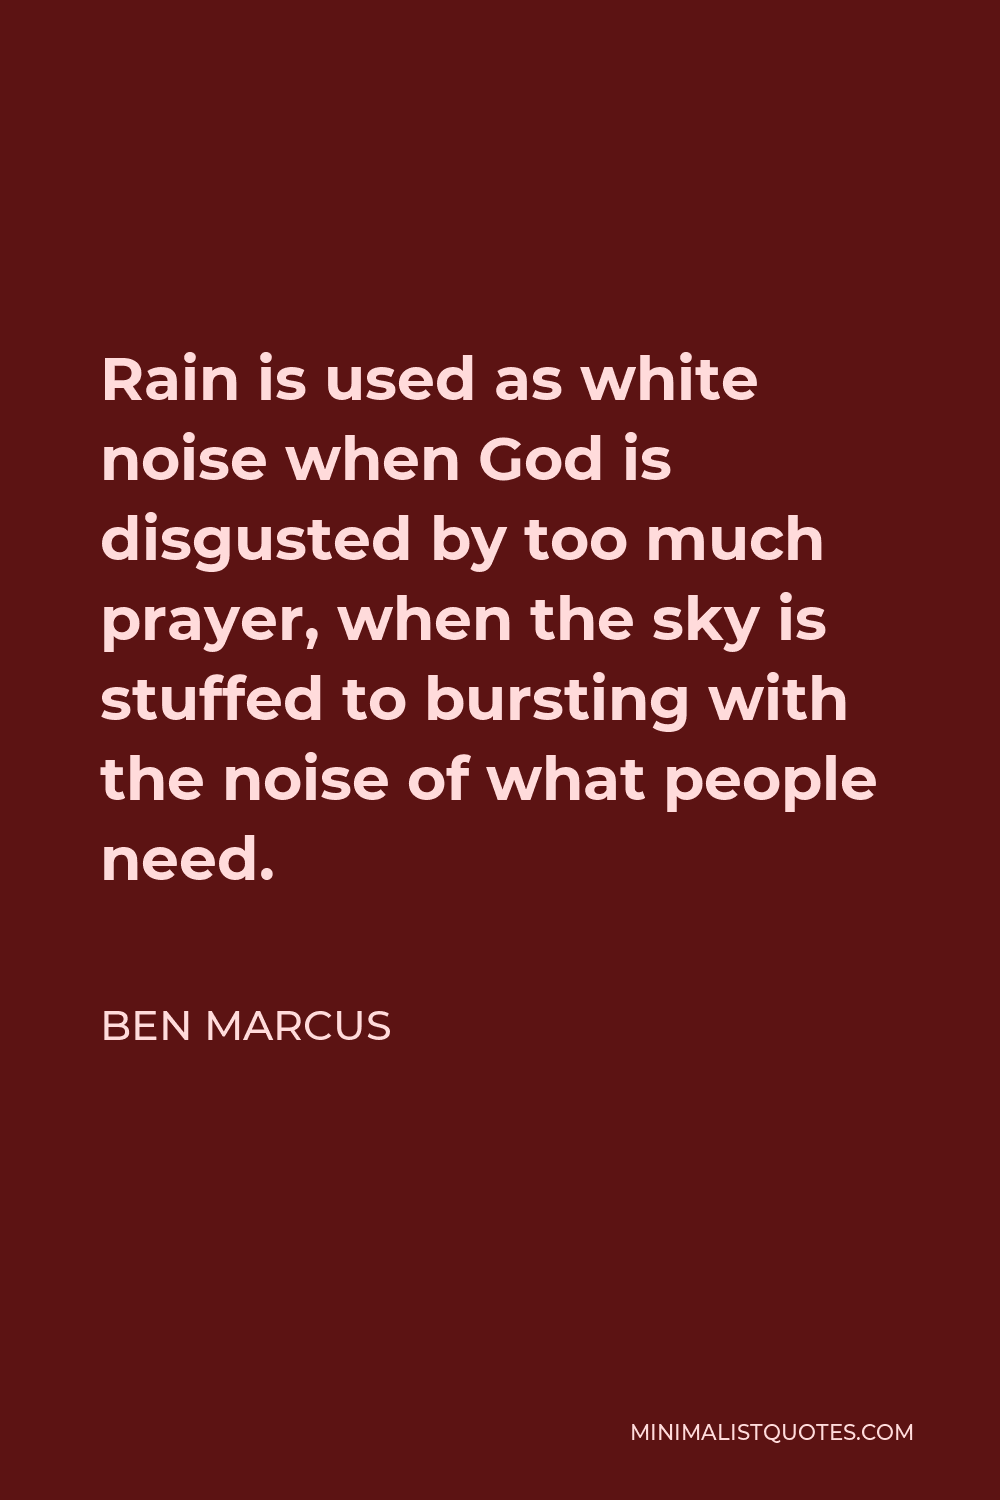 Ben Marcus Quote - Rain is used as white noise when God is disgusted by too much prayer, when the sky is stuffed to bursting with the noise of what people need.